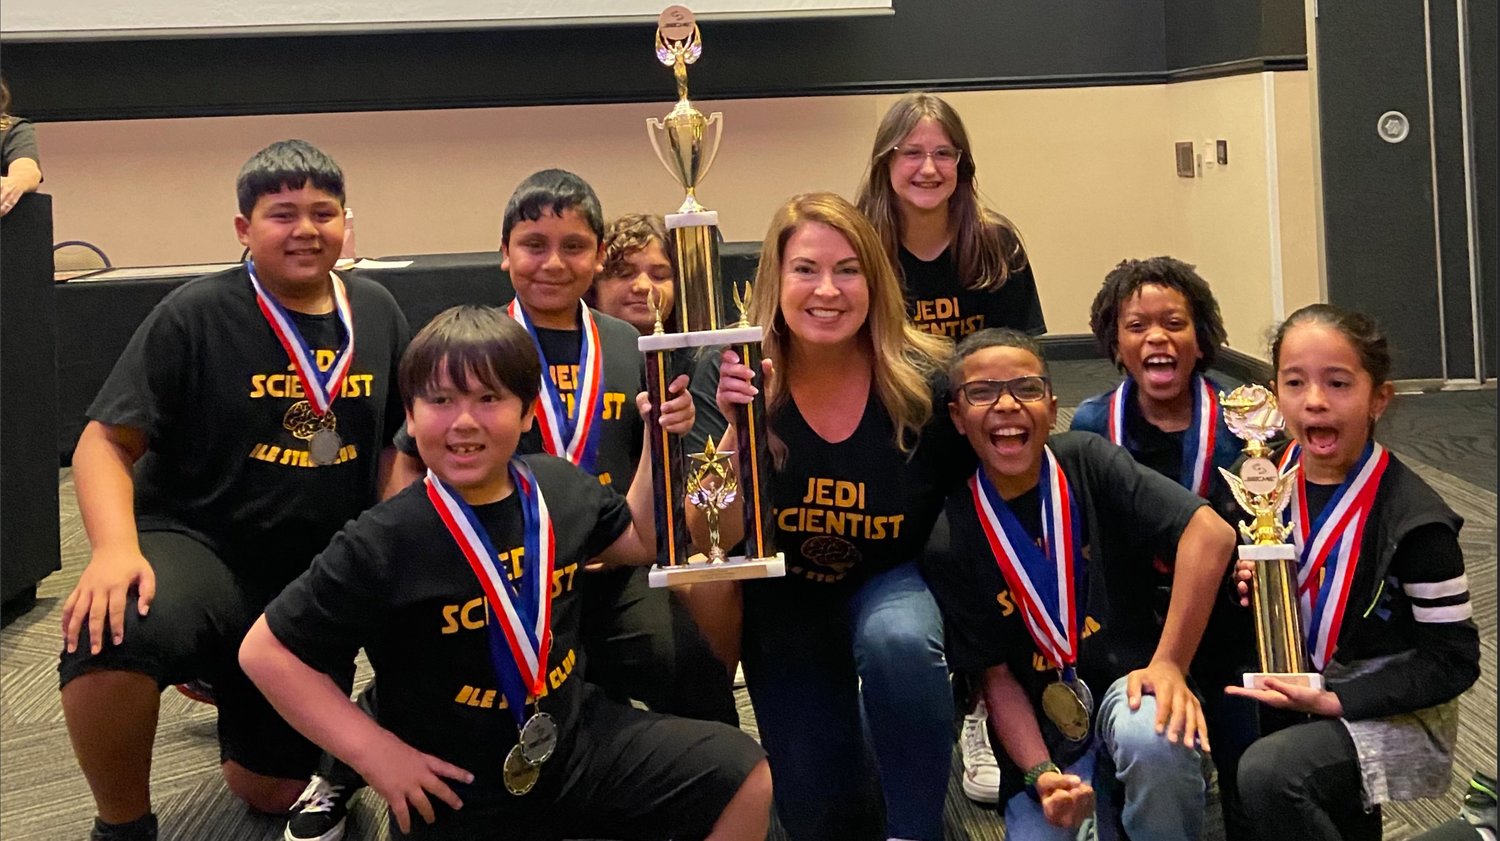 Dream Lake Elementary's Jedi Scientists Team B Mousetrap car team (Braudy German, Claudivel German, Colt Biaggi) will represent Central Florida in the Southeastern Consortium for Minorities in Engineering competition — at the national level.